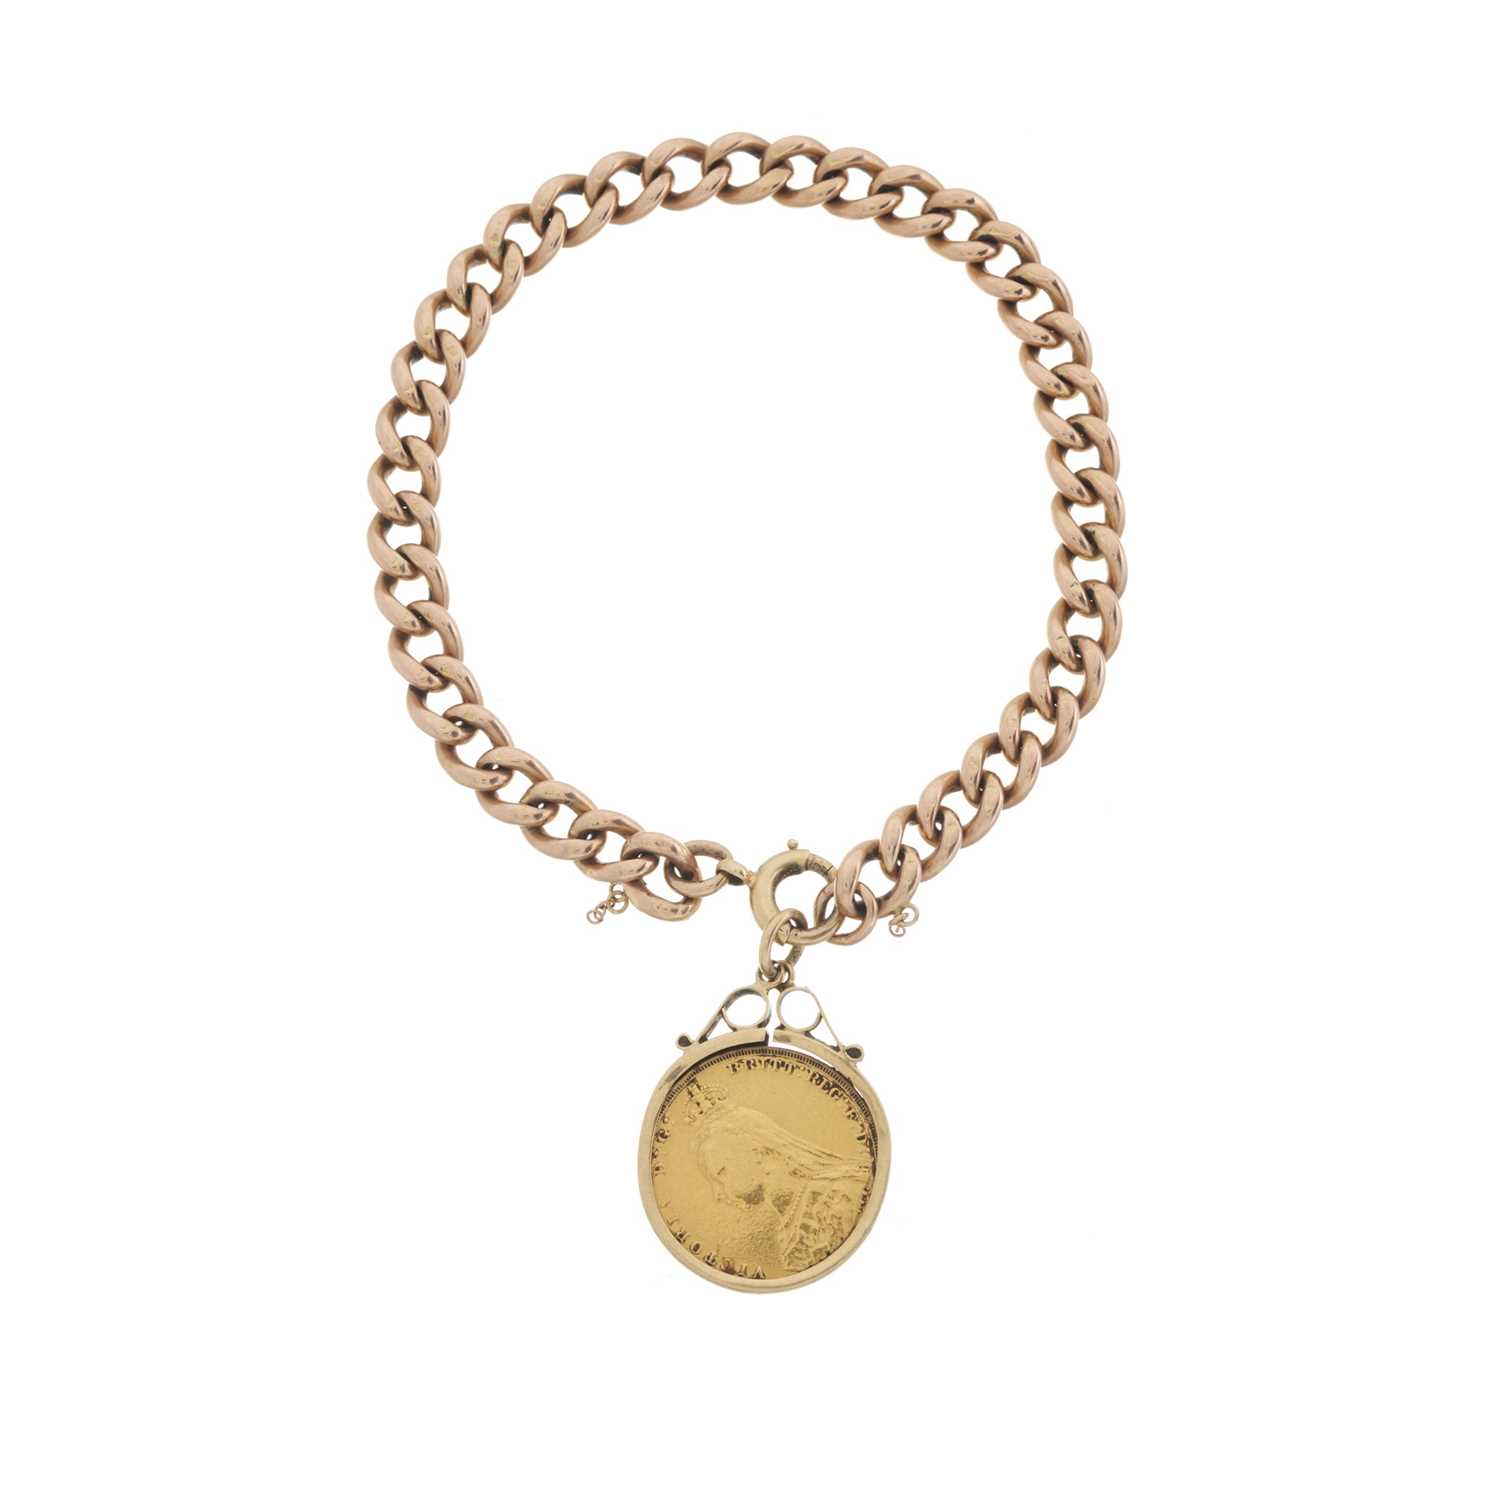 A late Victorian 9ct gold curb-link bracelet, with gold sovereign coin